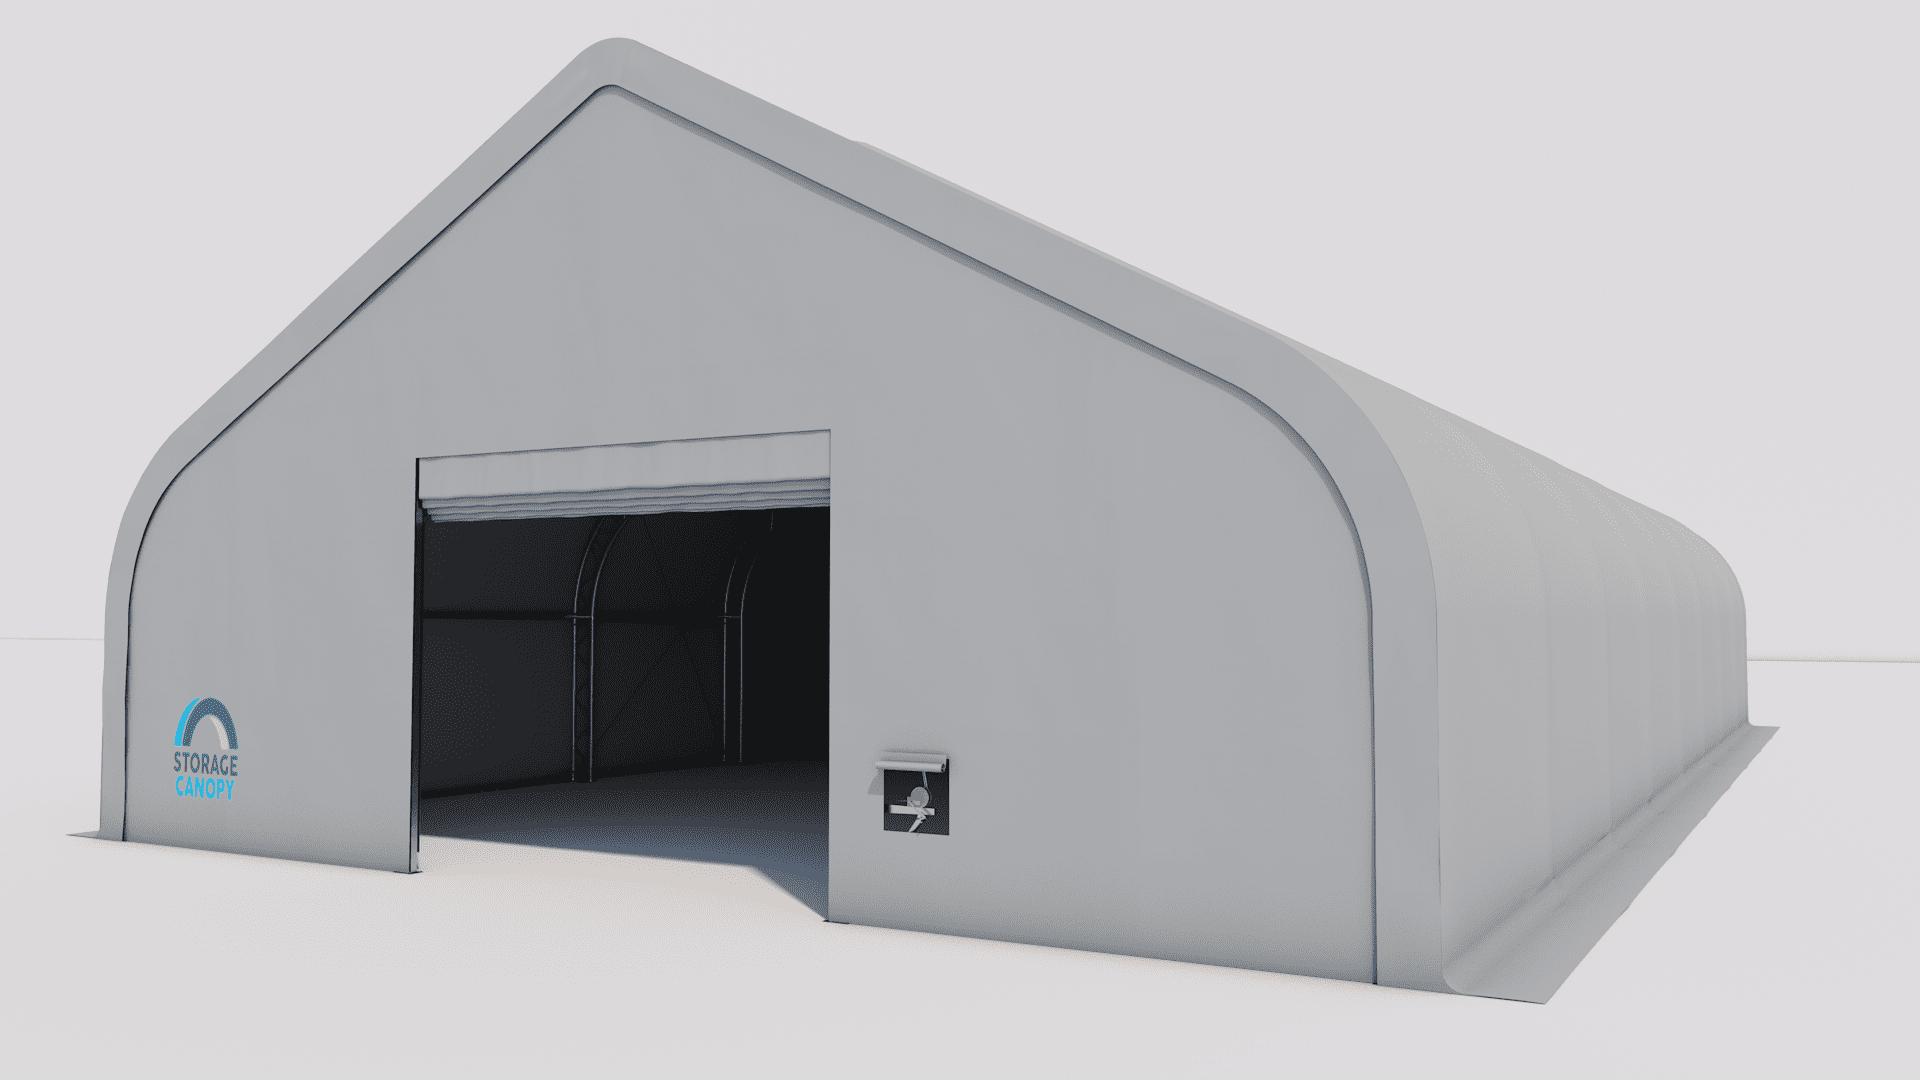 fabric building 40W 80L 21H - persp right open grey